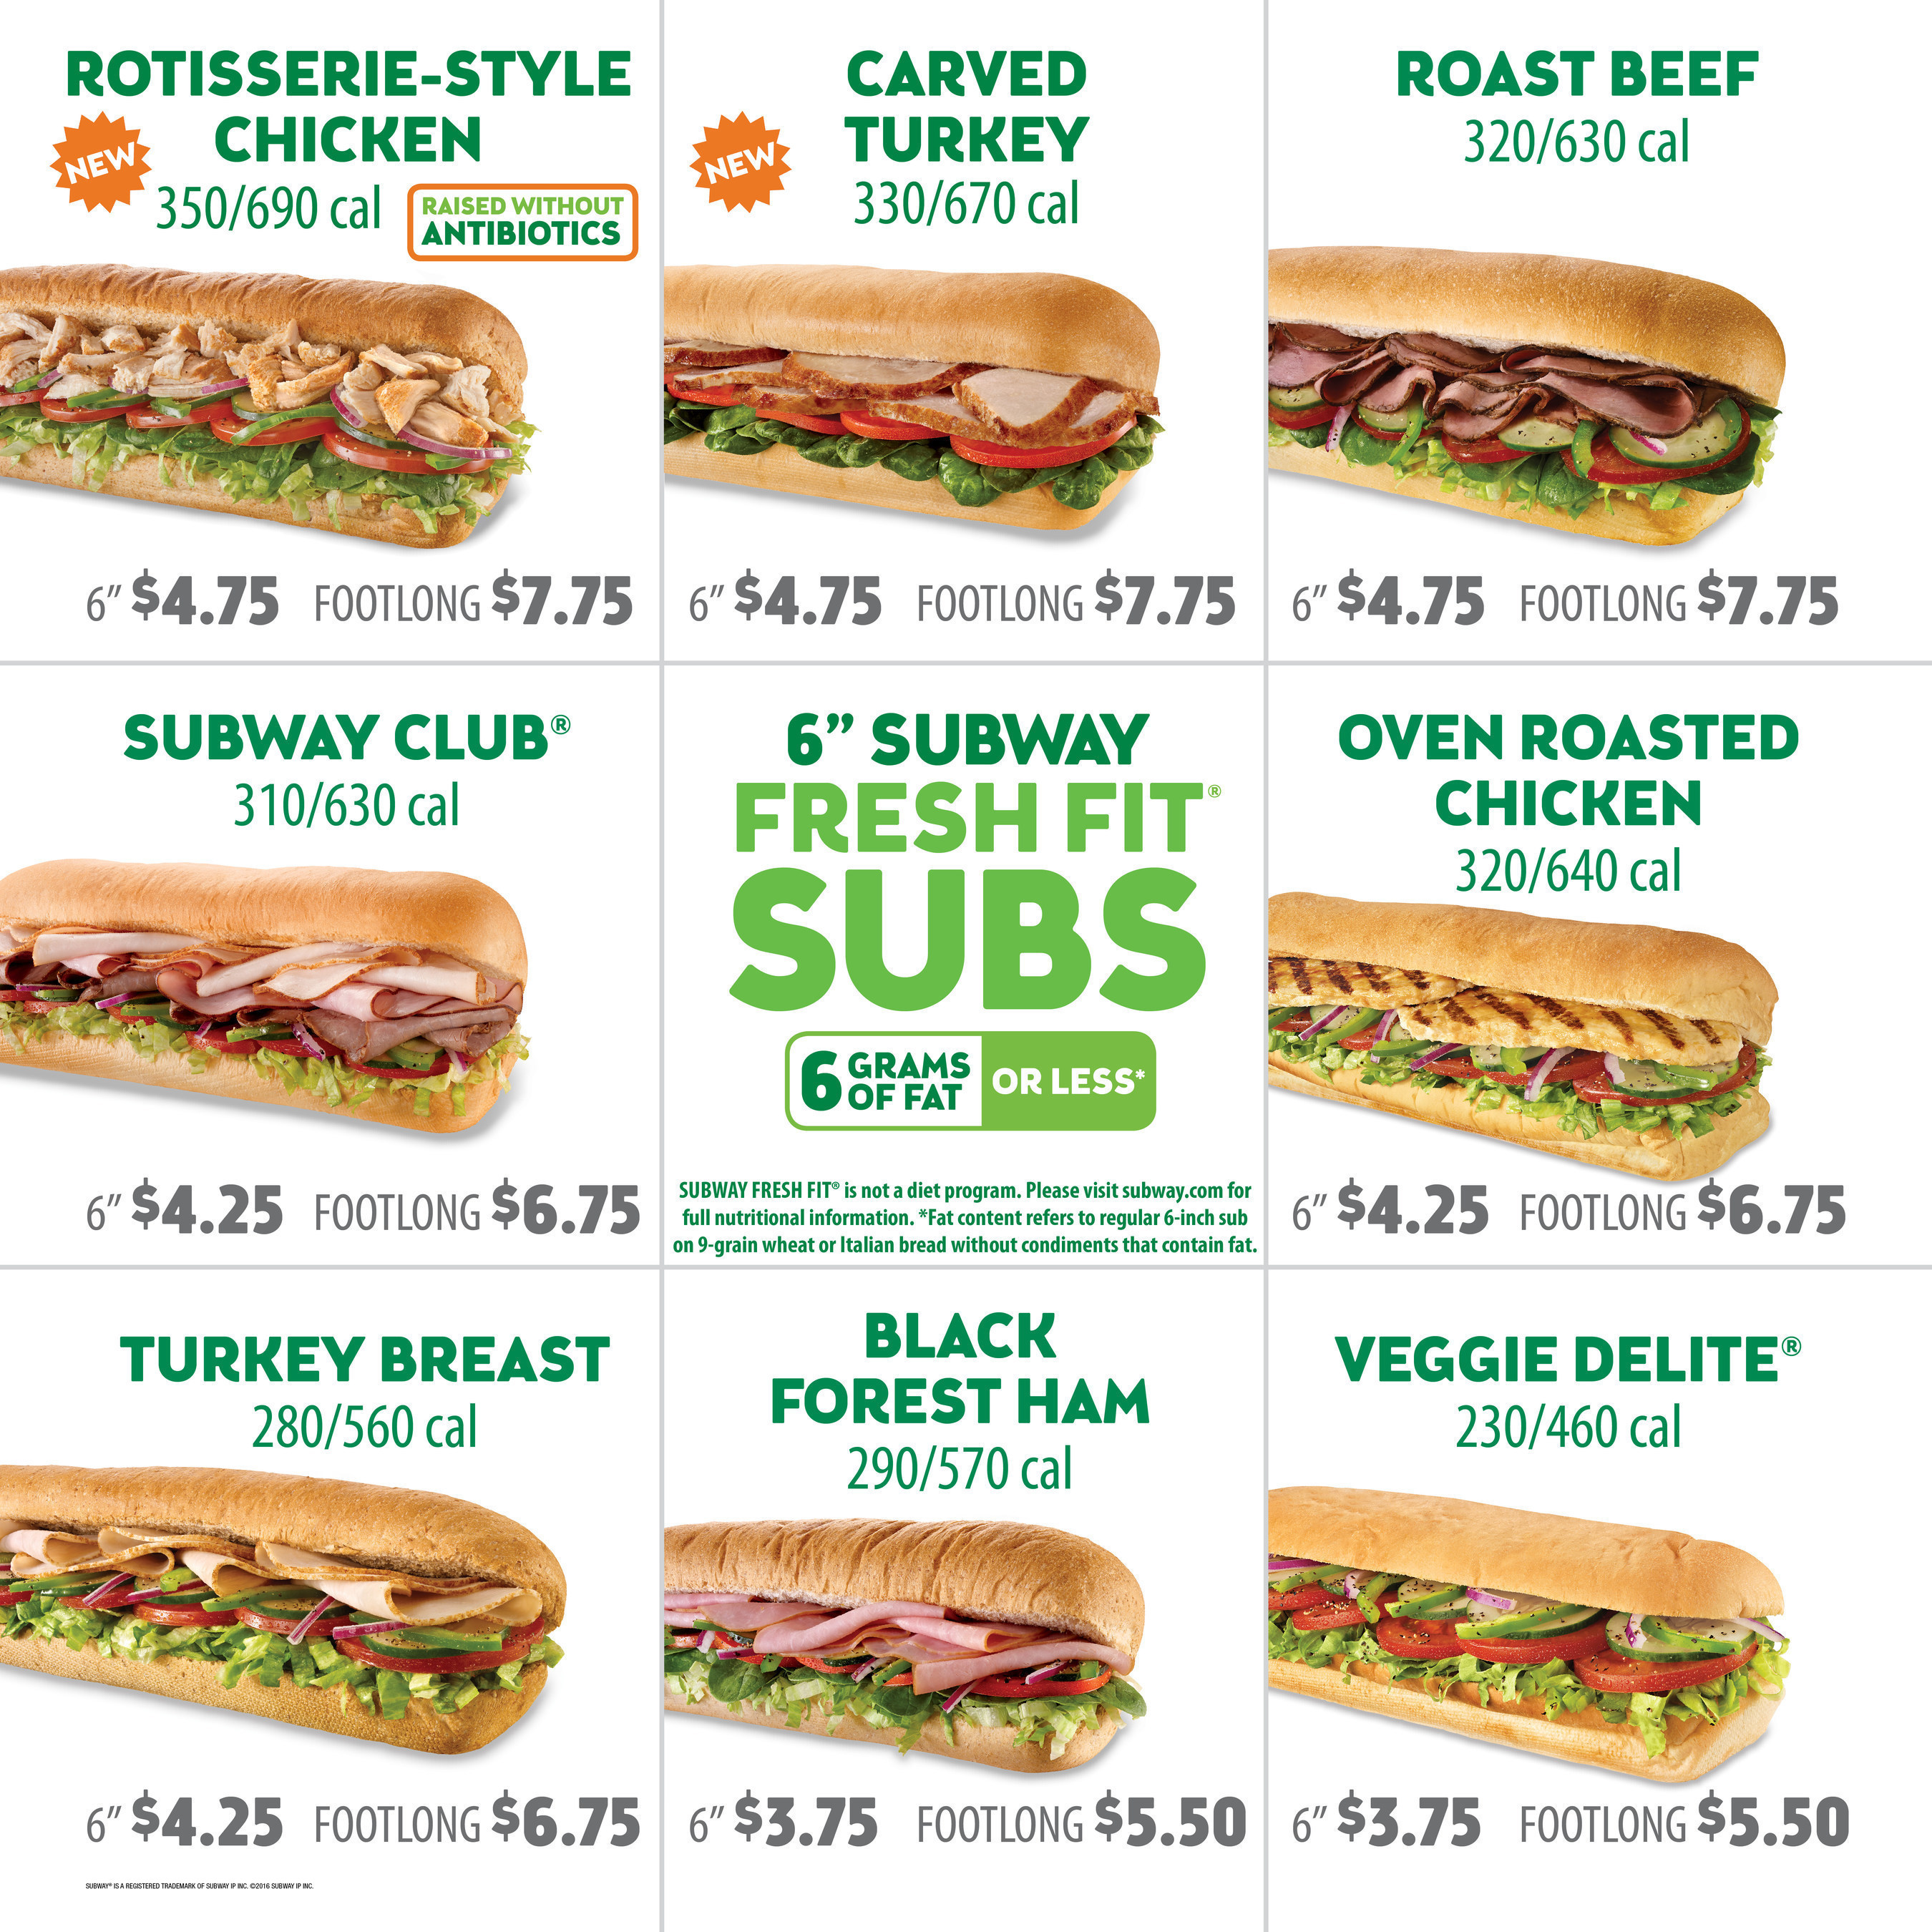 Subway Sandwich Shops To Include Calories On All U S Menu Boards.